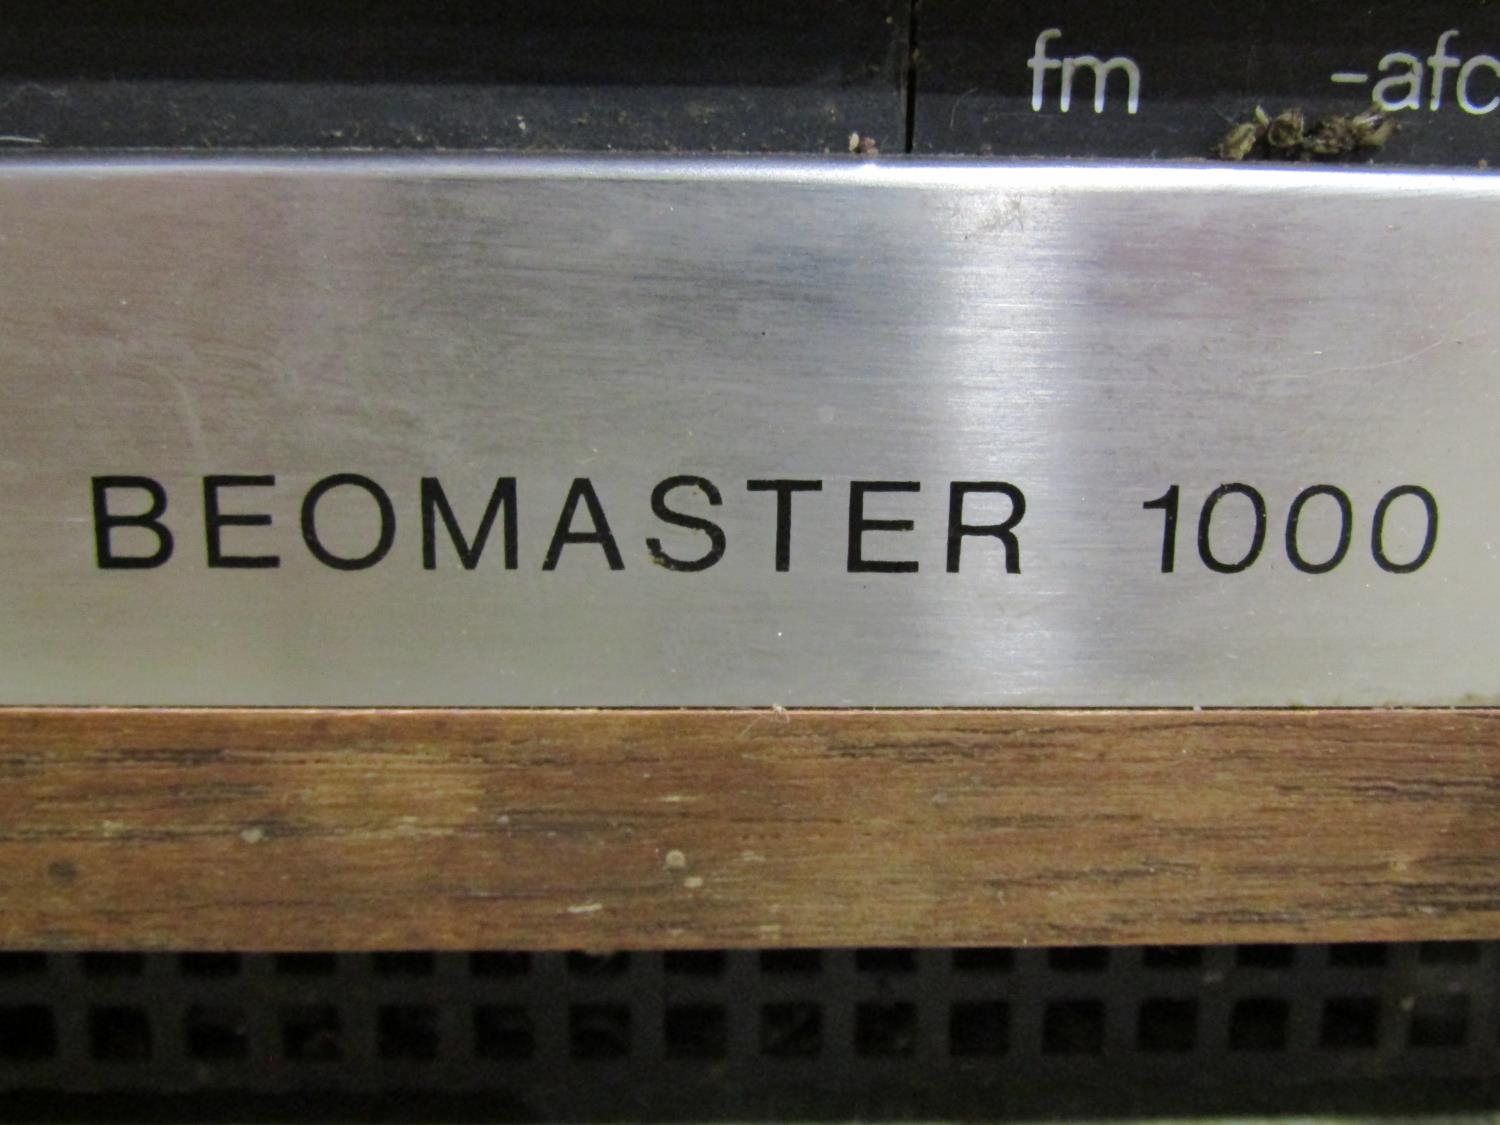 A vintage Bang & Olufsen audio set comprising Beomaster 1000, a 1000 Beogram record deck, and a pair - Image 11 of 12